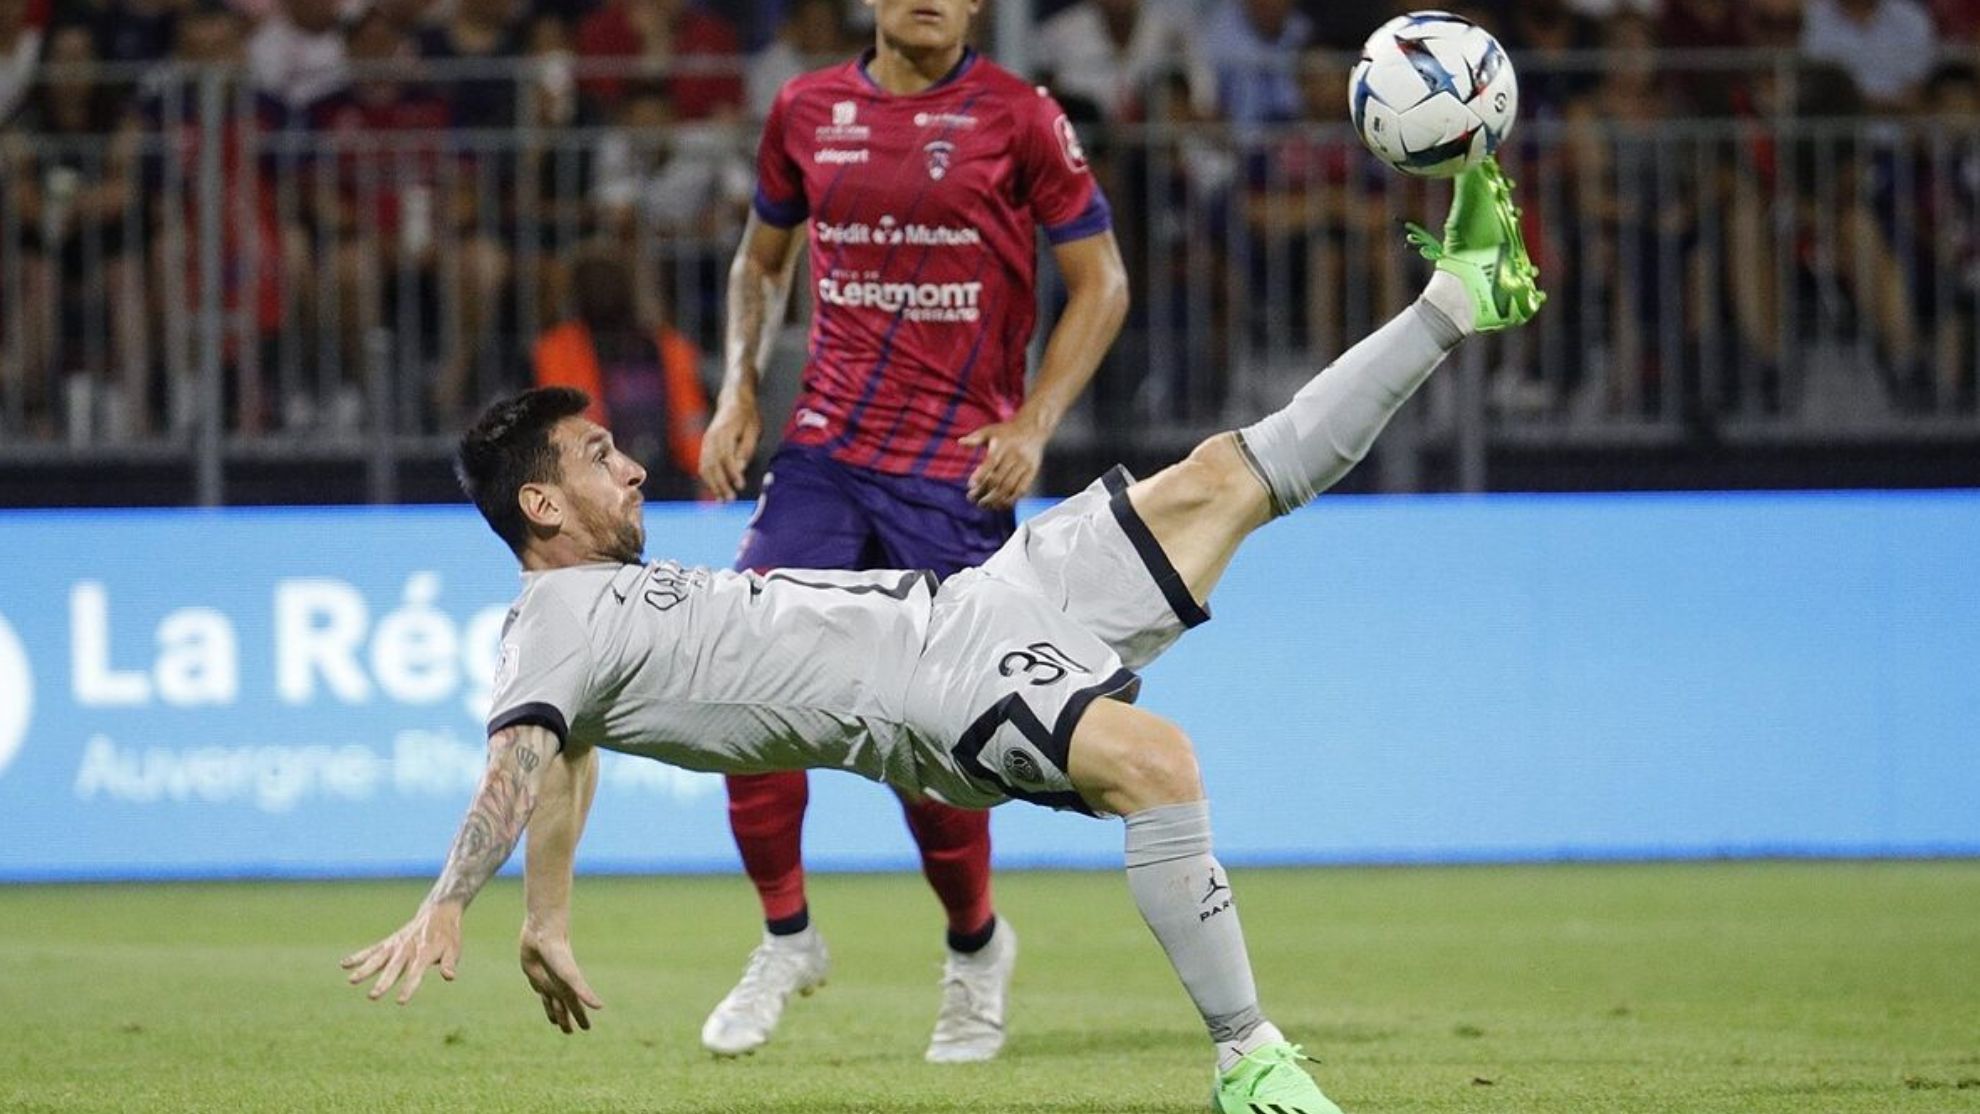 PSG run riot on Clermont, Lionel Messi seals 5-0 victory with brilliant bicycle kick - Marca